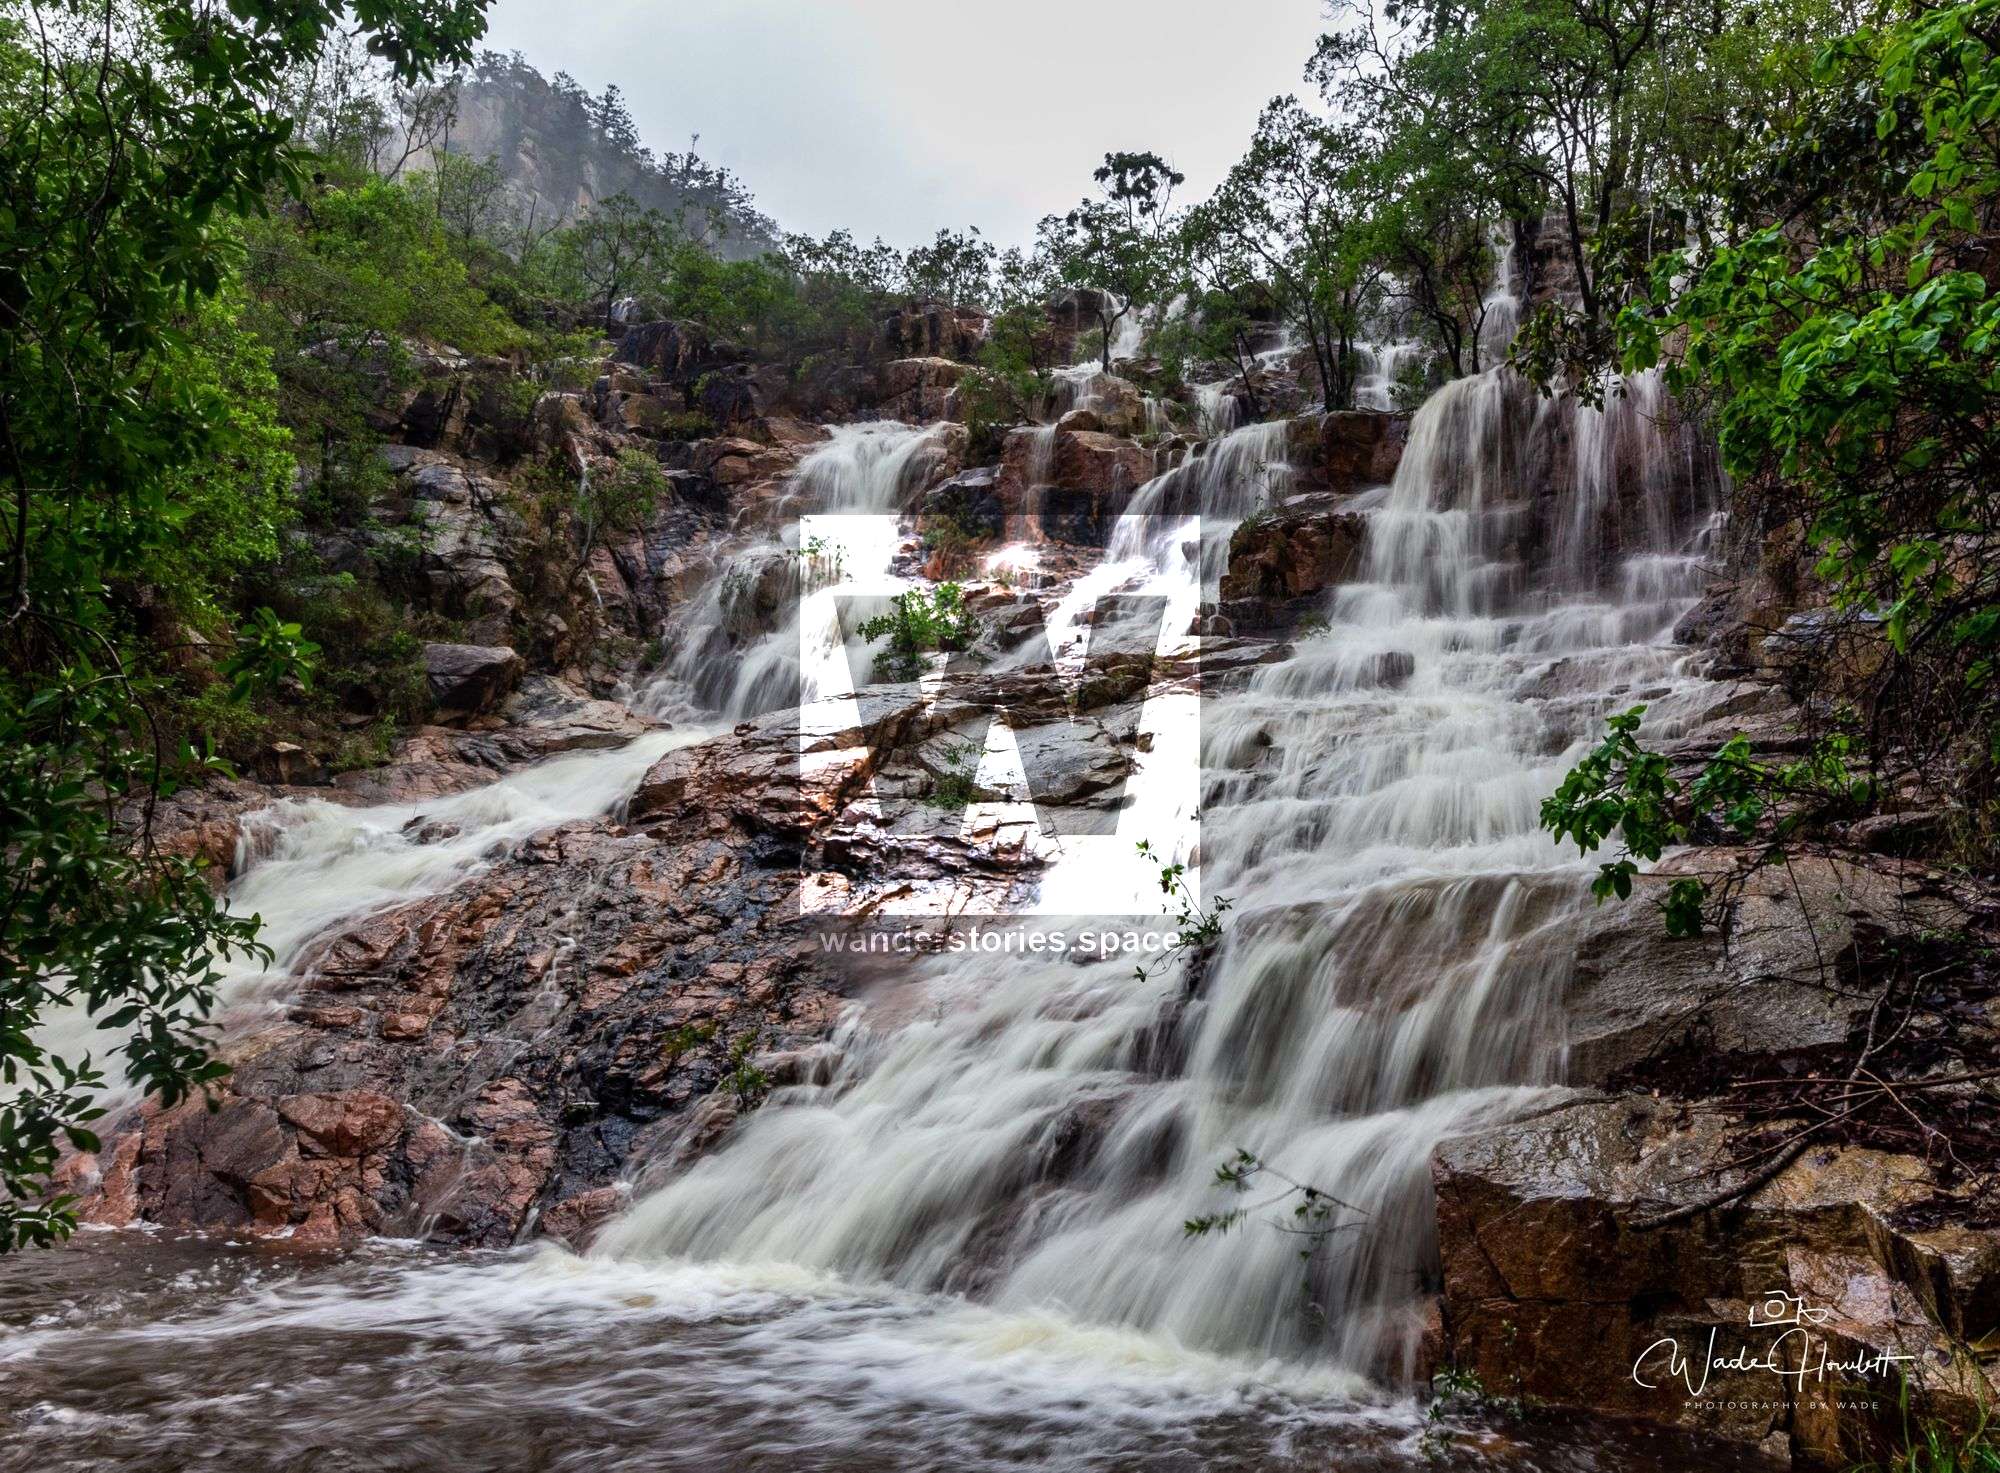 How to get to Bridal Falls, Hervey Range